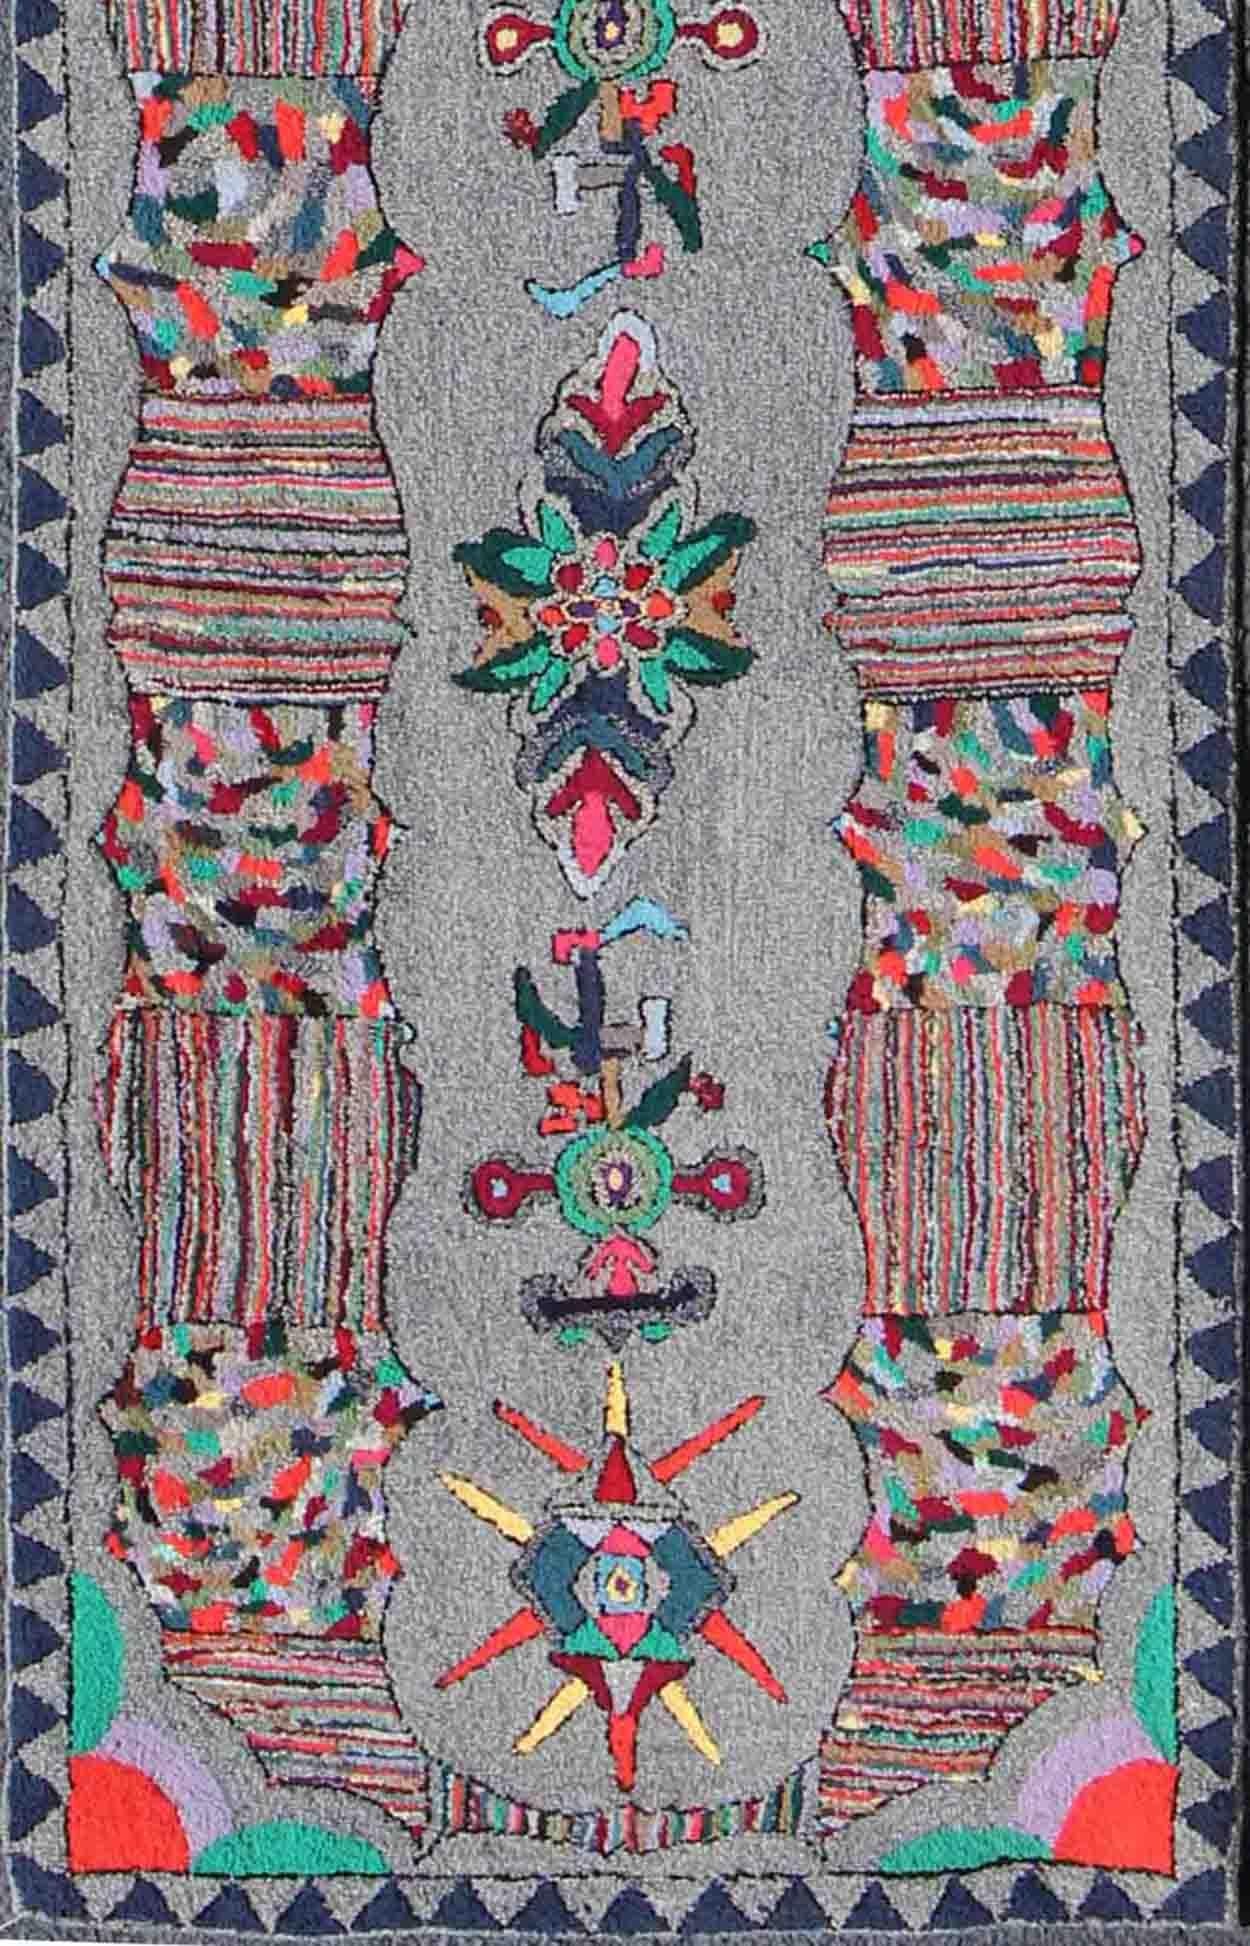 Vintage American Hooked runner with colorful vertical medallion design, rug f-0706, country of origin / type: United States / hooked, circa 1960.

This vintage American Hooked rug depicts a beautiful design of vertically-arranged medallion motifs